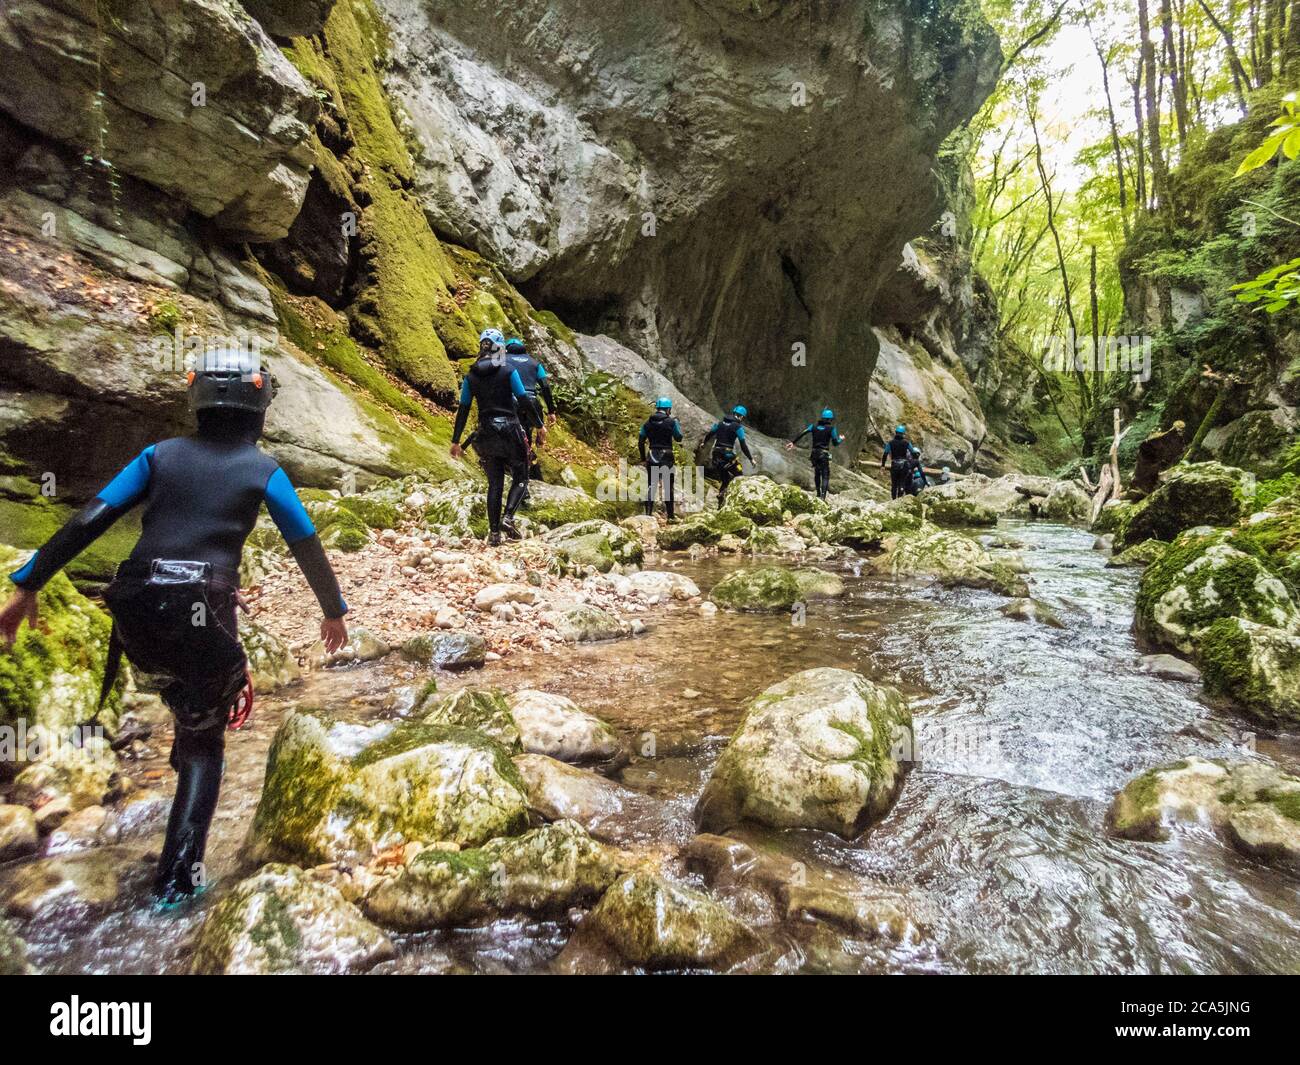 France, Isere, Vercors Regional Park, Sassenage, family canyoning on the upper segment of the Furon river descending from the plateau Stock Photo